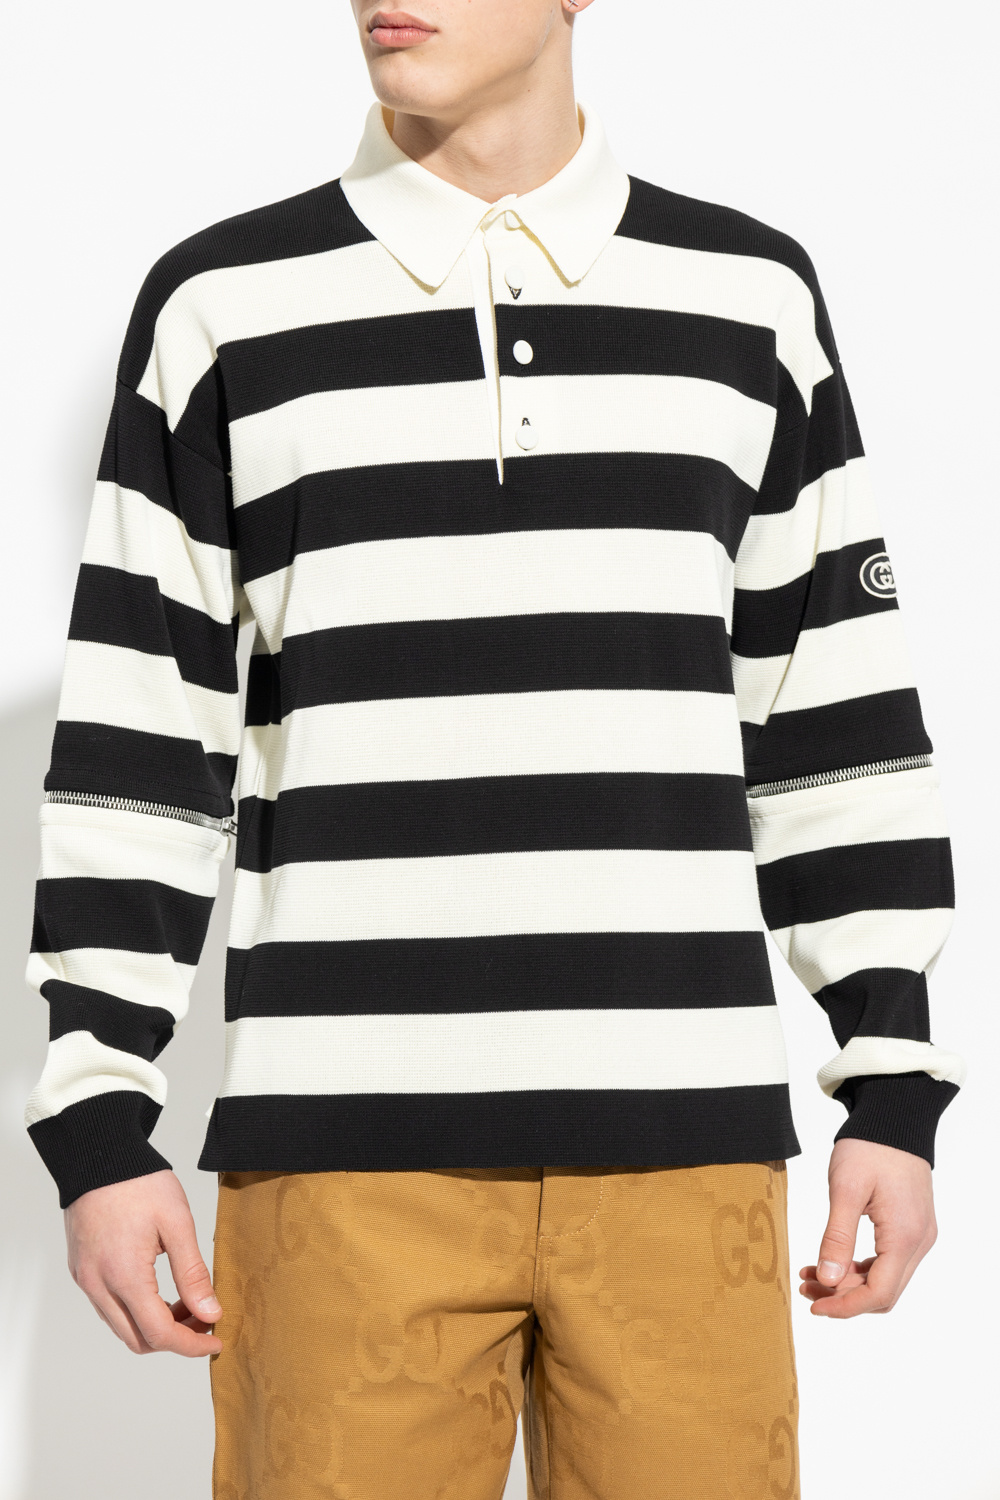 Gucci polo knee-length shirt with detachable sleeves